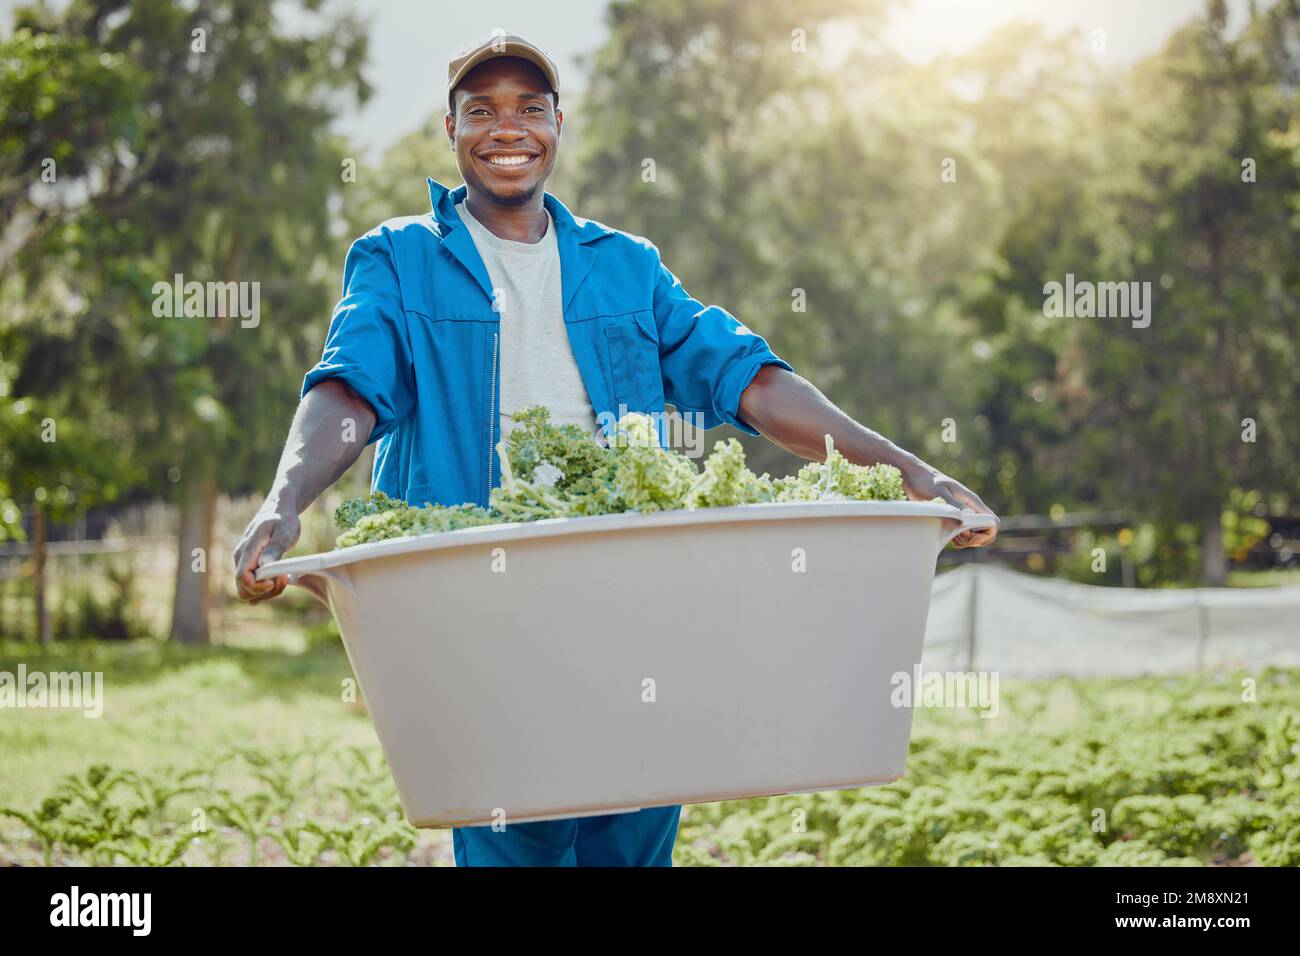 I love seeing hard work come to fruition. a handsome young farmer standing alone and holding a bucket of freshly harvested kale. Stock Photo